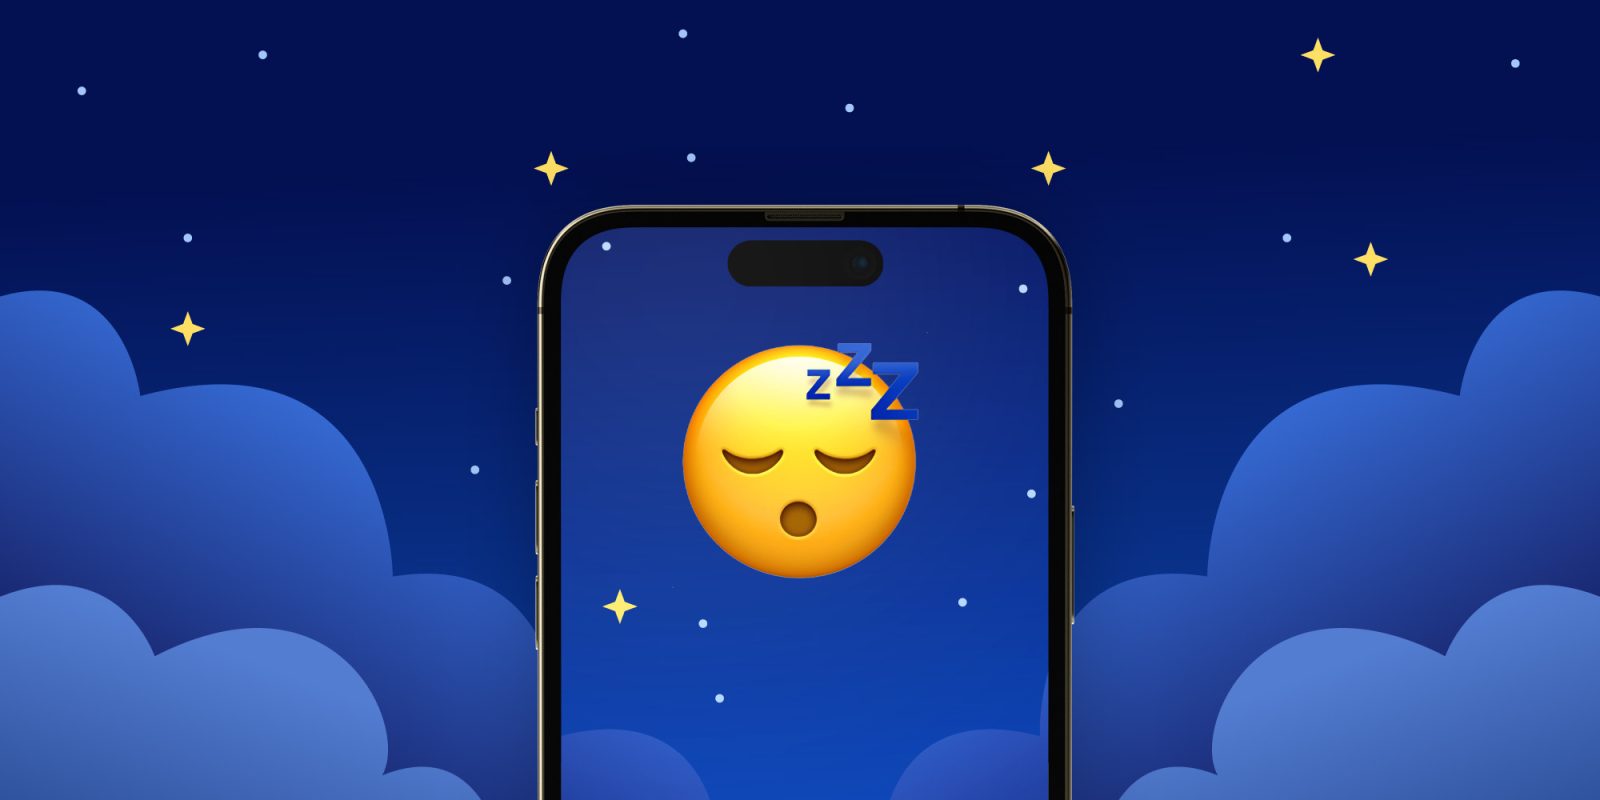 Apple's Night Shift mode m - News - What Mobile